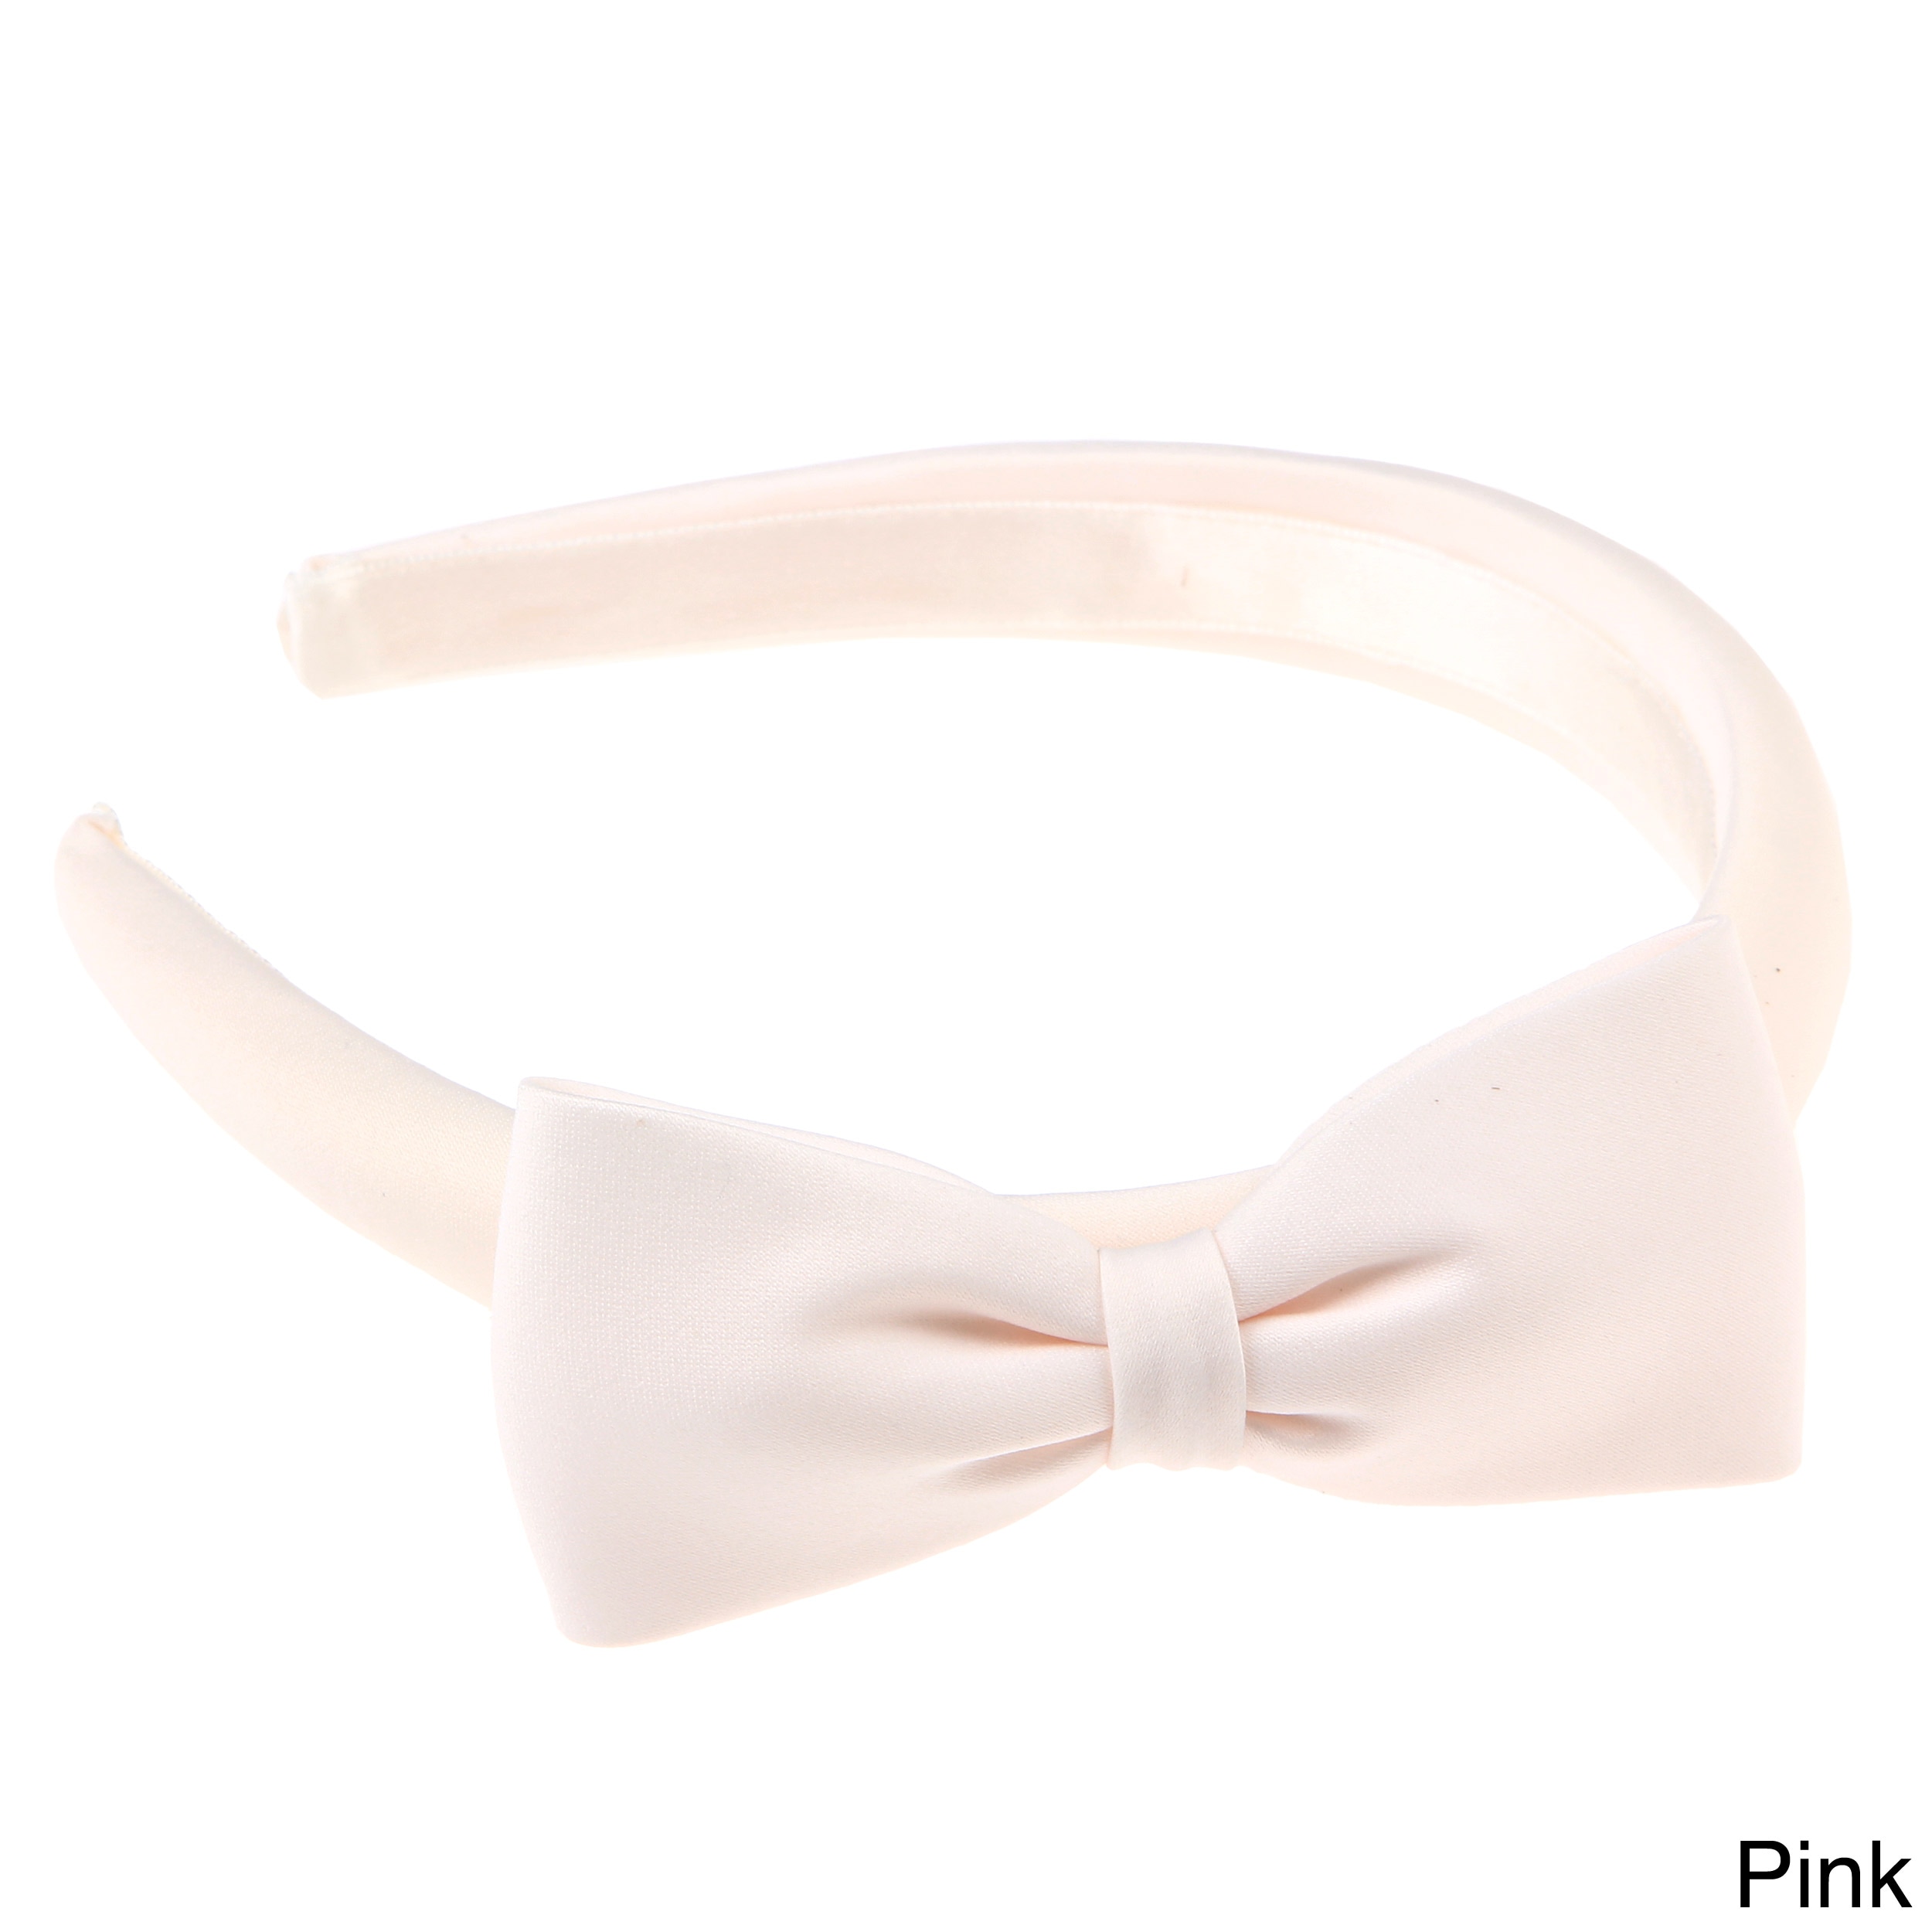 Sweetie Pie Collection Girls Peau Satin Headband With Bow